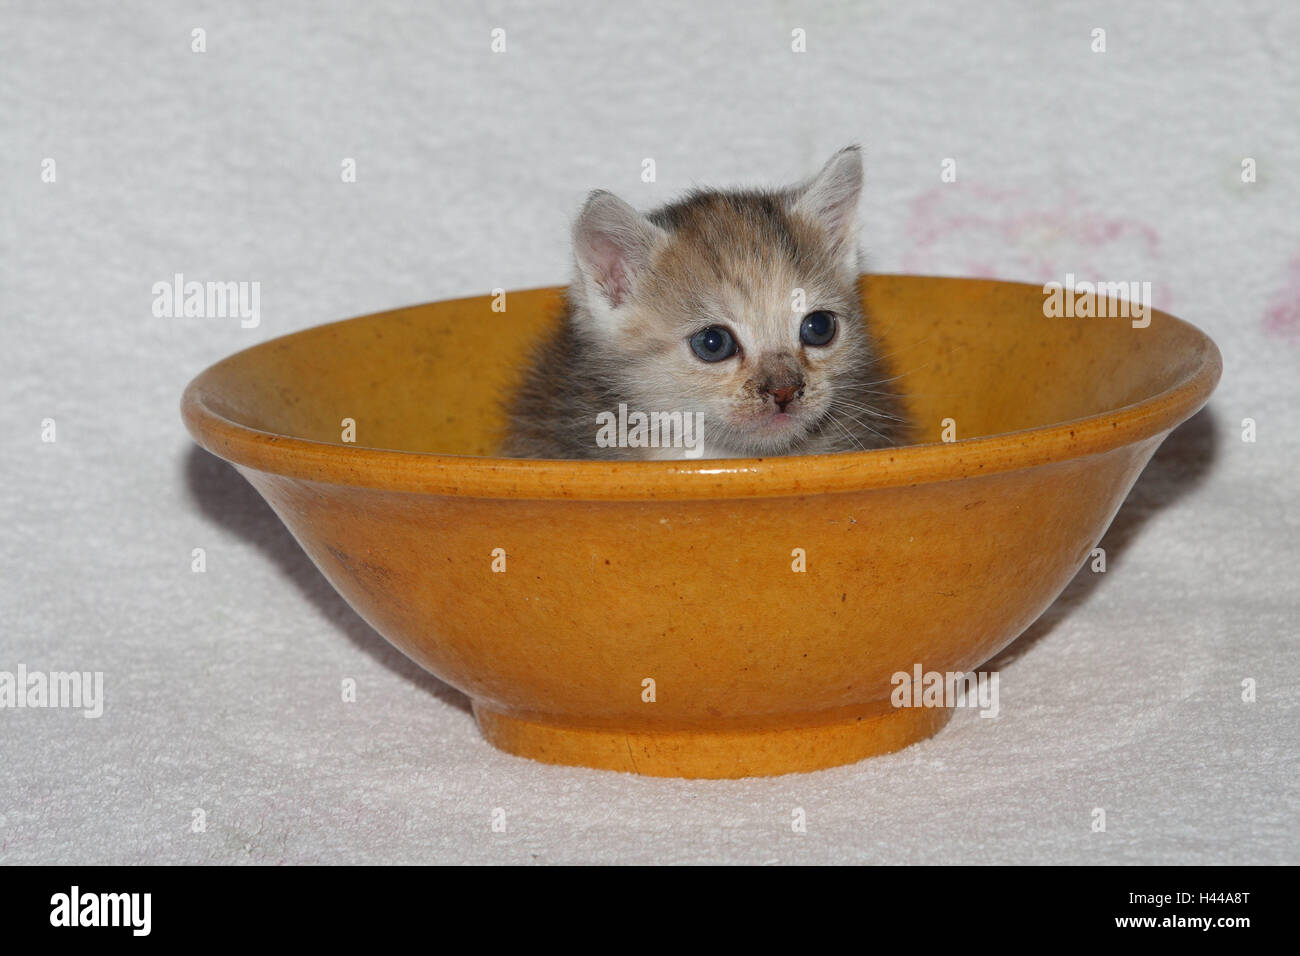 Plates, cat, young, sit, bed, animals, mammals, pets, small cats, Felidae, domesticates, house cat, young animal, kitten, yellow, small, awkward, clumsy, creep, creep, curiosity, hiding place, play, hide, sweetly, individually, only, striped, bowl, peel, young animals, animal baby, inside, Stock Photo